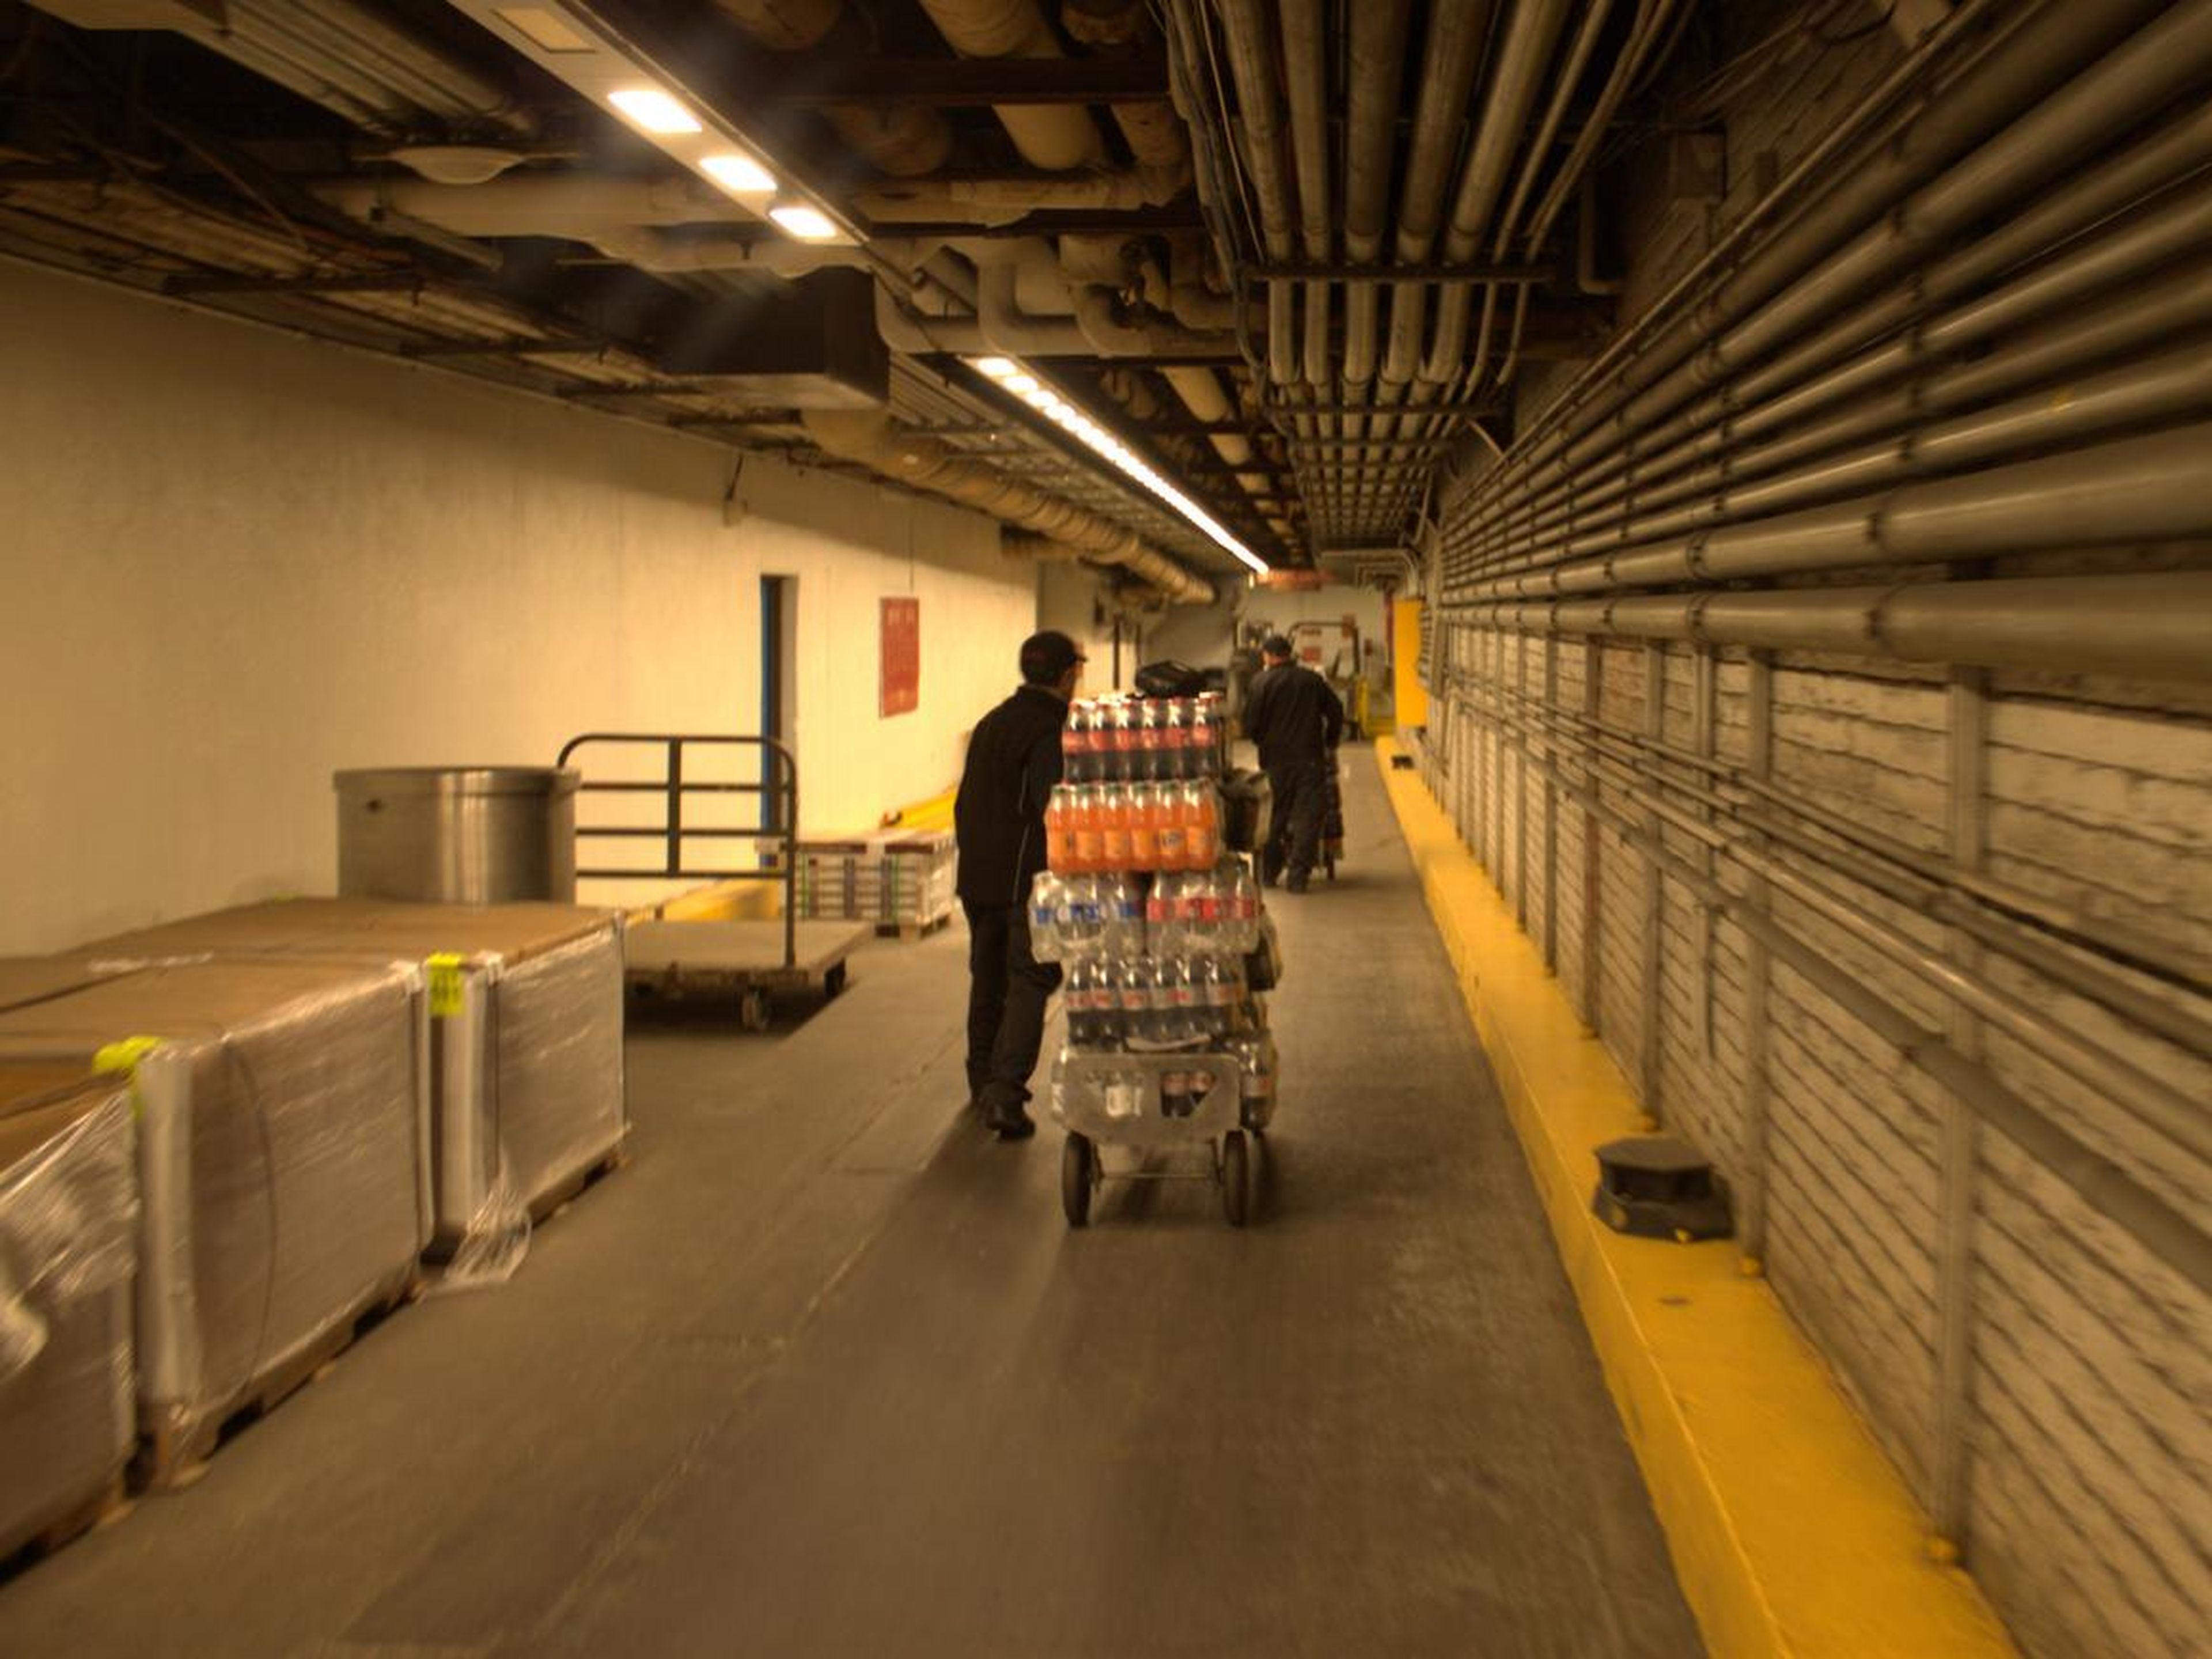 Louis and Santiago deftly moved the thousands of bottles through the storage area and into the part of Penn Station I'm more familiar with.